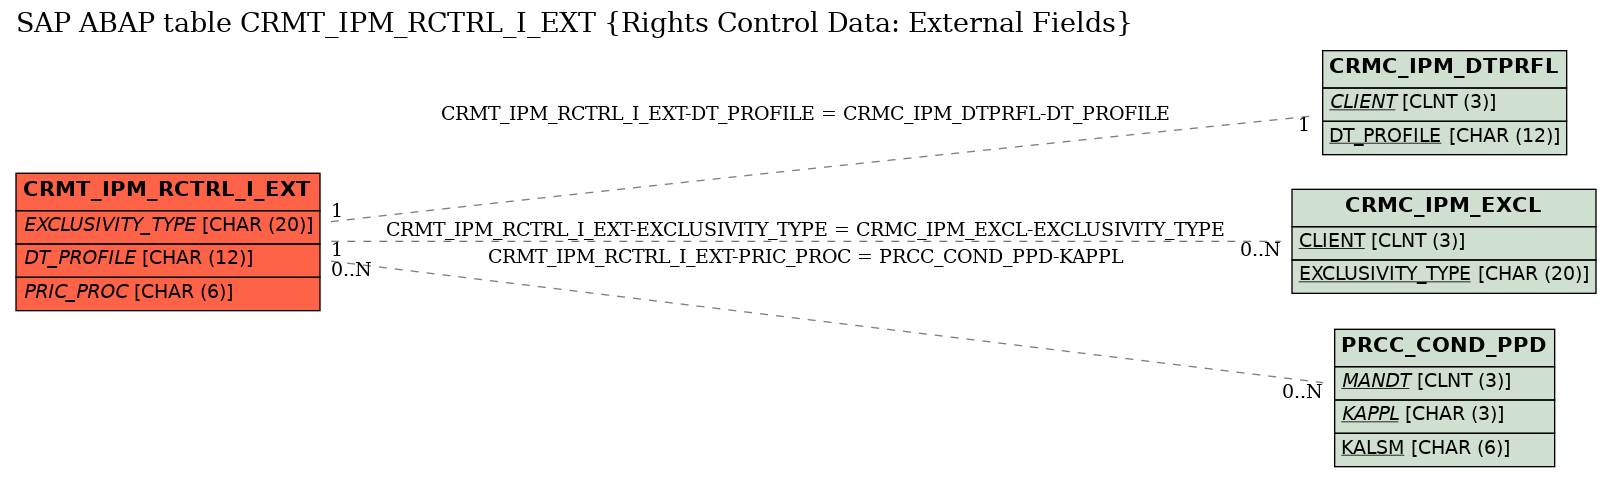 E-R Diagram for table CRMT_IPM_RCTRL_I_EXT (Rights Control Data: External Fields)